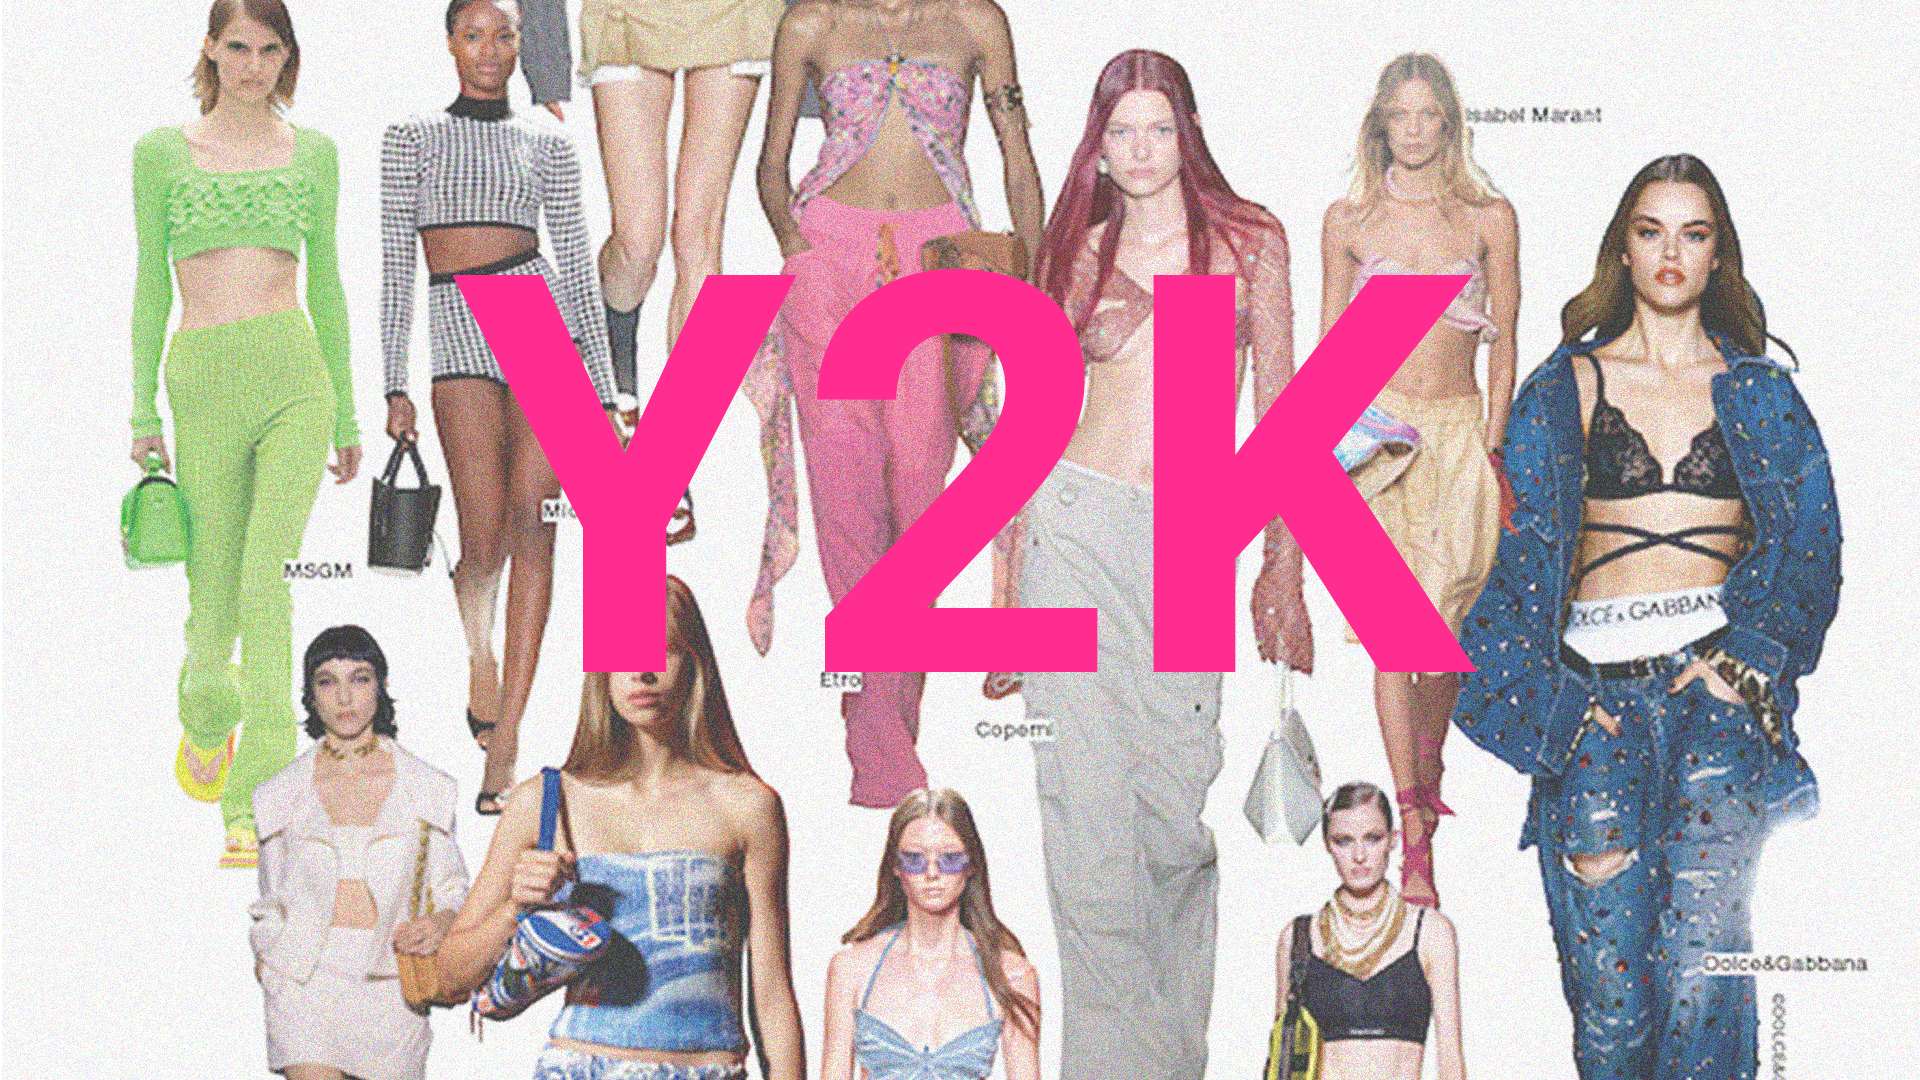 Why is Gen Z so into Y2K aesthetic and fashion? : r/GenZ